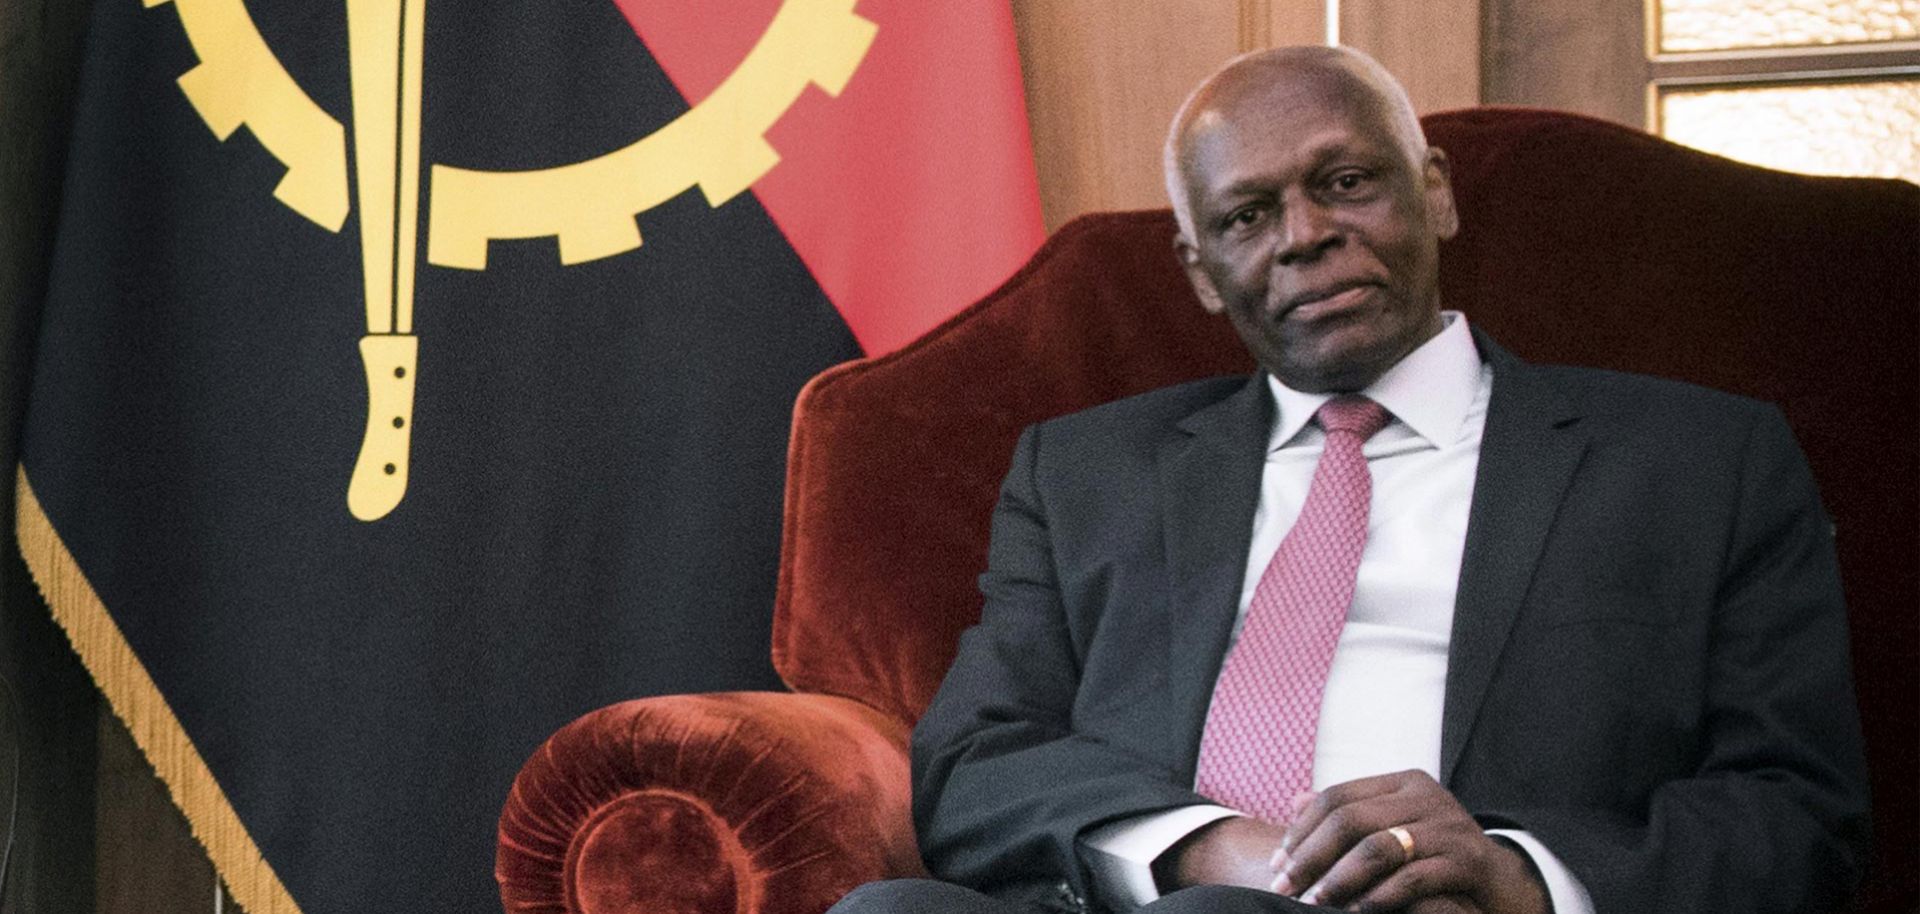 Angolan President Jose Eduardo dos Santos sits before his country's flag during a meeting with Belgian leaders in April. Dos Santos has held the presidency since 1979.